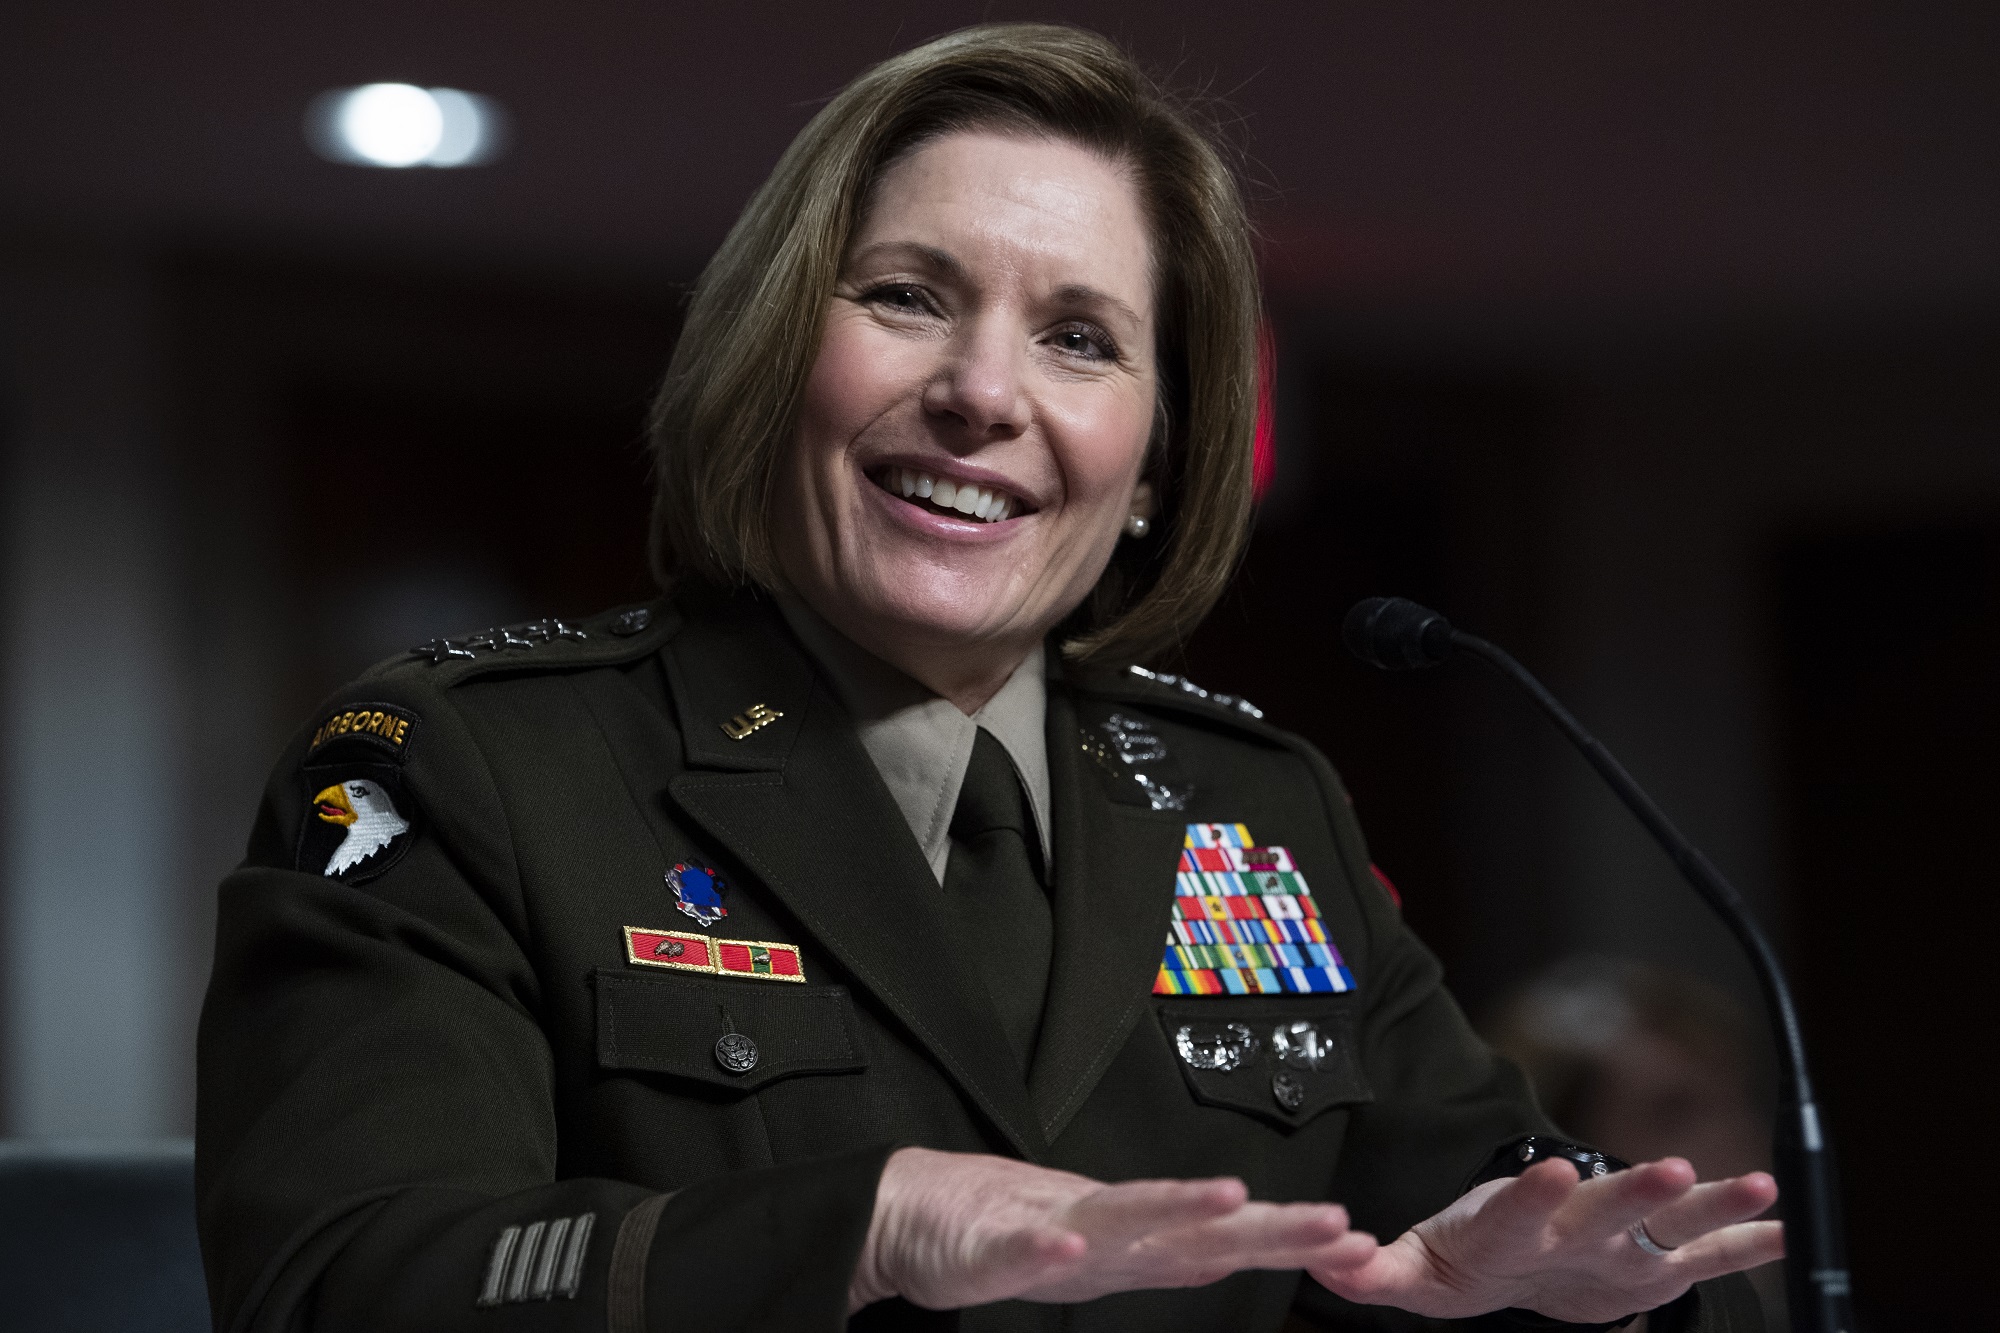 UNITED STATES - AUGUST 03: Lt. Gen. Laura Richardson, nominee to be commander, U.S. Southern Command, testifies during her Senate Armed Services Committee confirmation hearing in Dirksen Building on Tuesday, August 03, 2021. (Photo By Tom Williams/CQ-Roll Call, Inc via Getty Images)